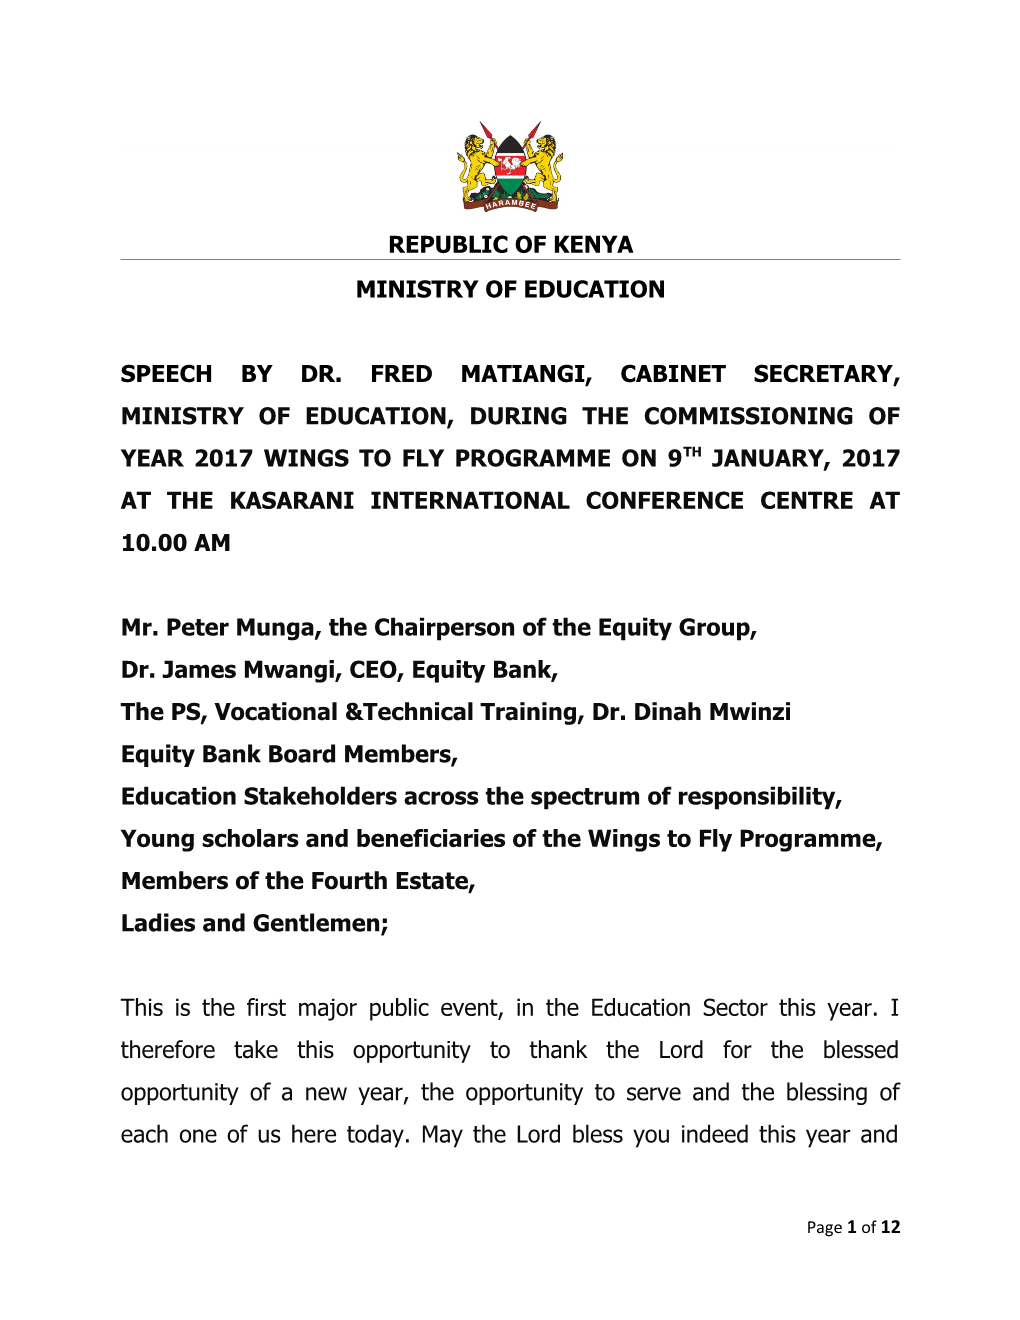 Mr. Peter Munga, the Chairperson of the Equity Group